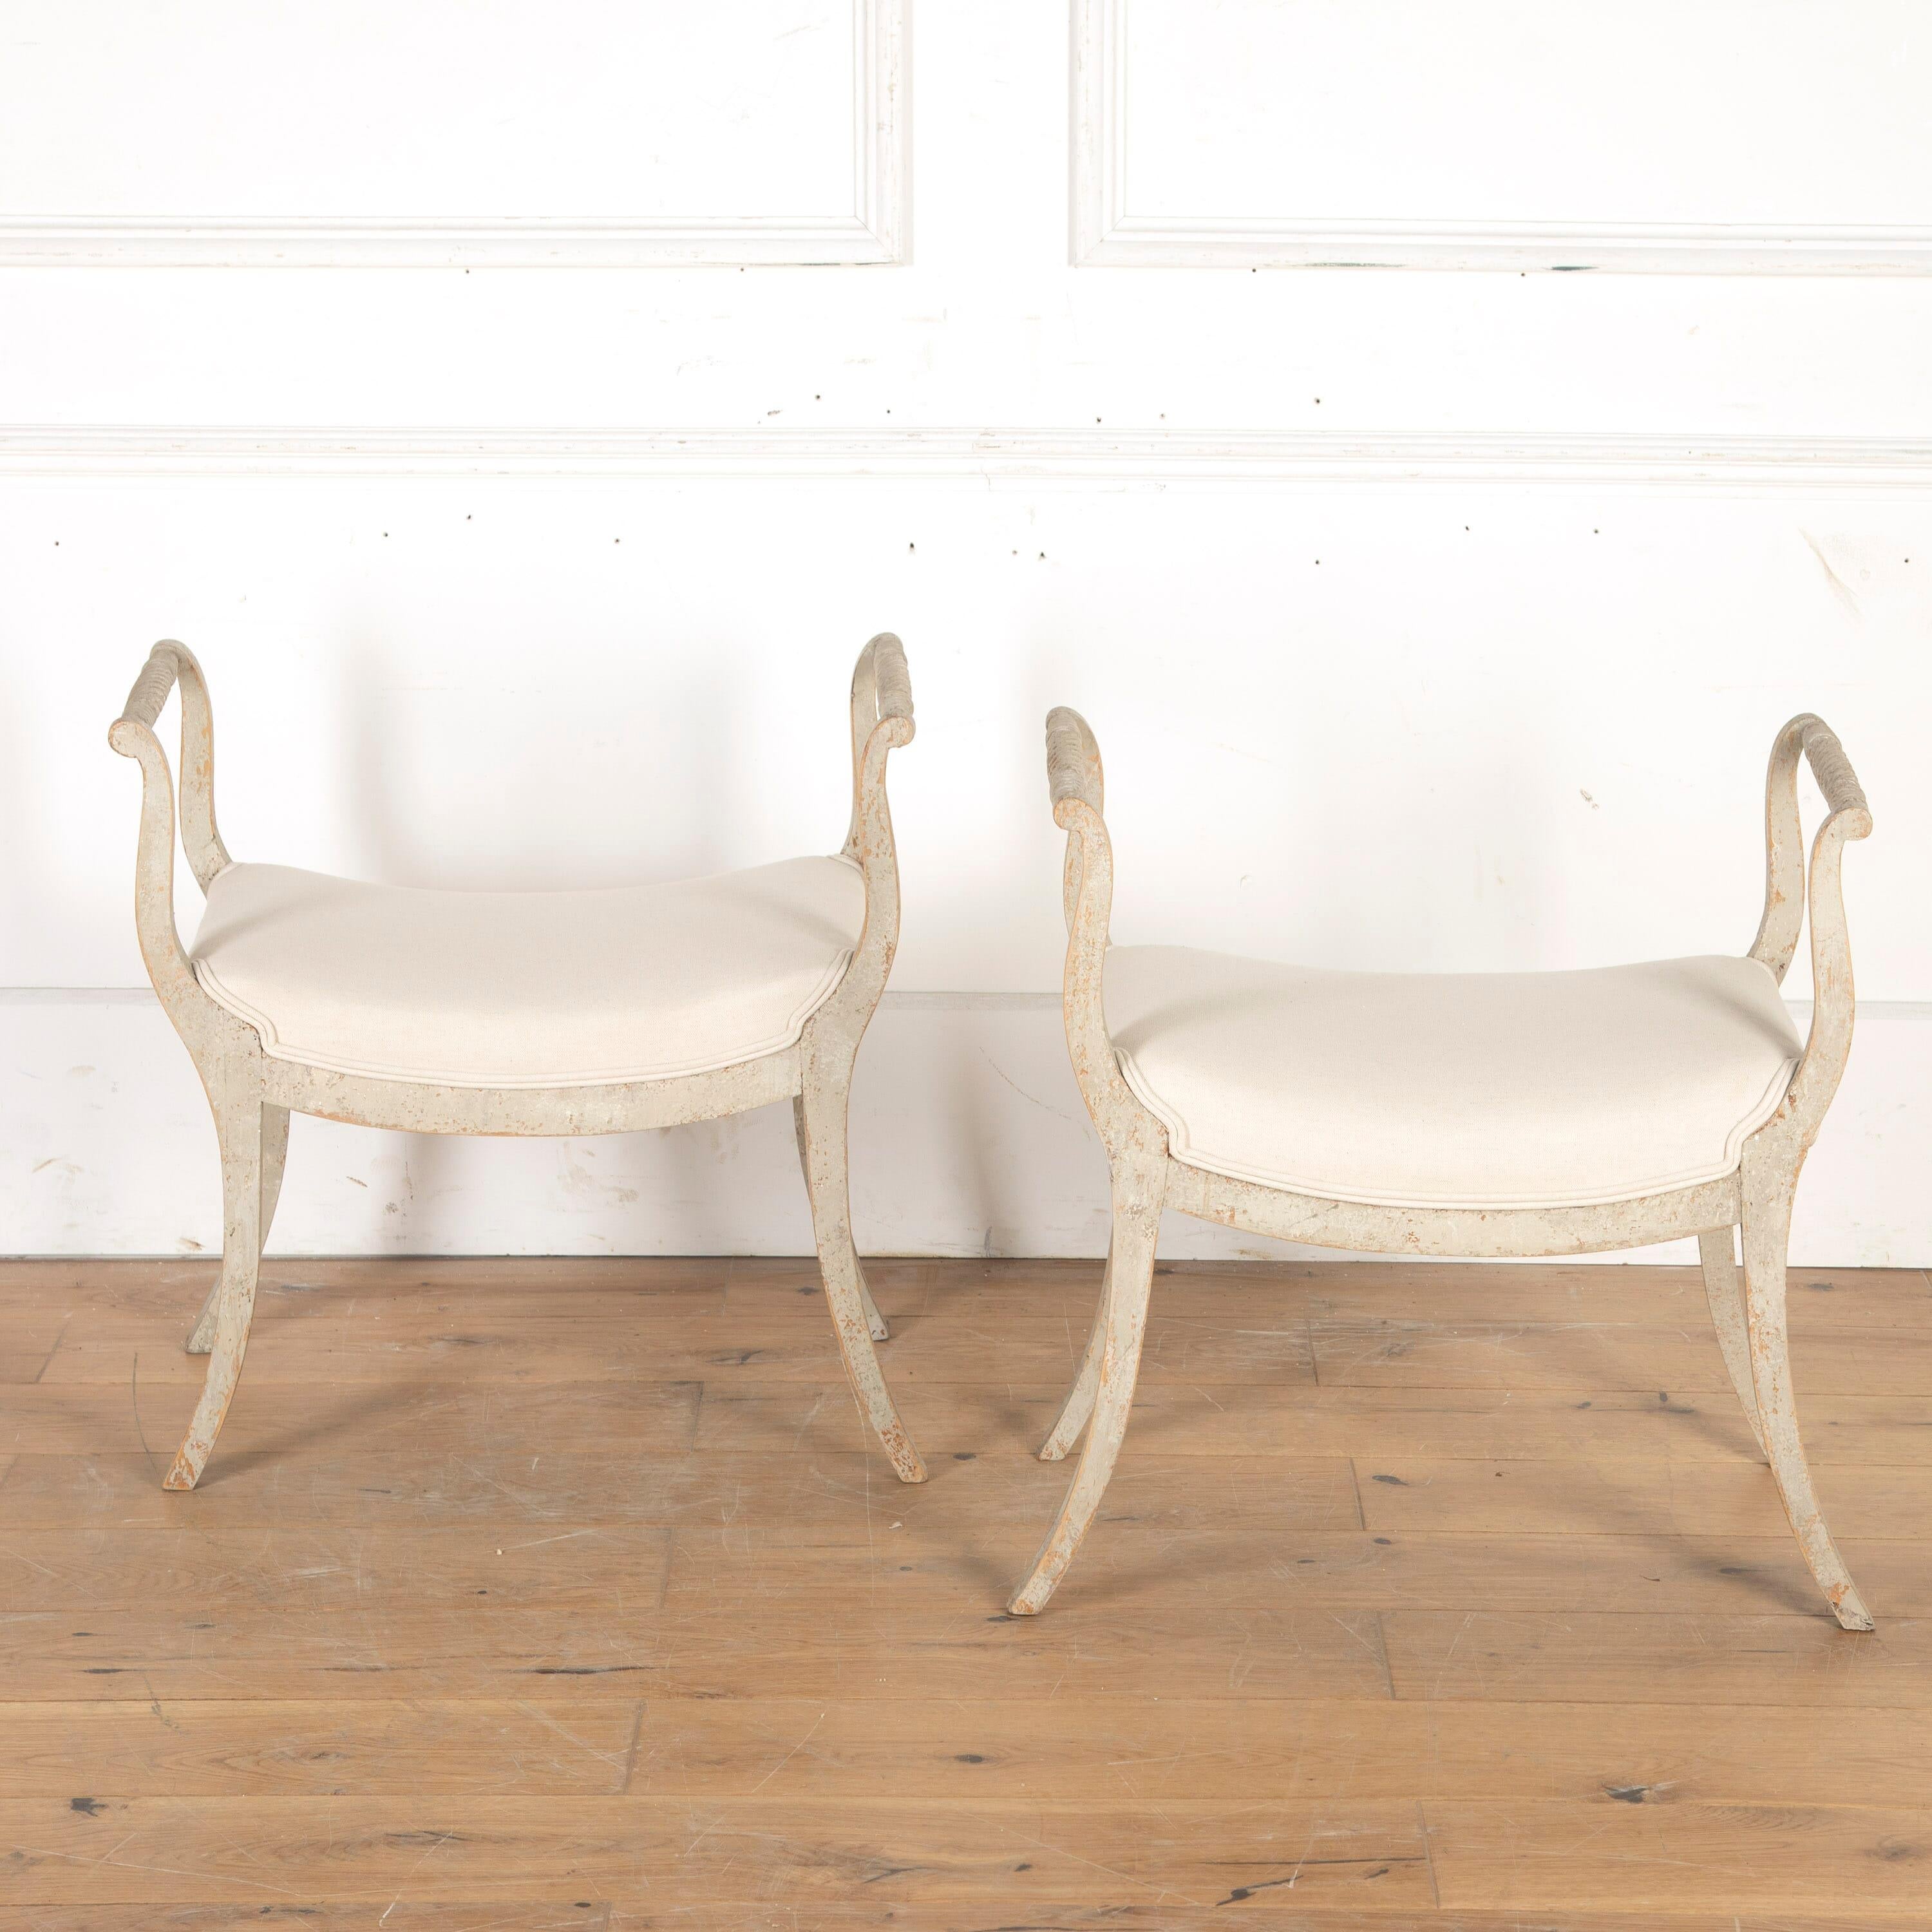 Pretty pair of Swedish Empire early 19th Century stools, circa 1820.

With lovely carved detailing to the armrest top rails and resting on elegant sabre legs. 

These stools have been repainted and stabilised for everyday use and the seats have